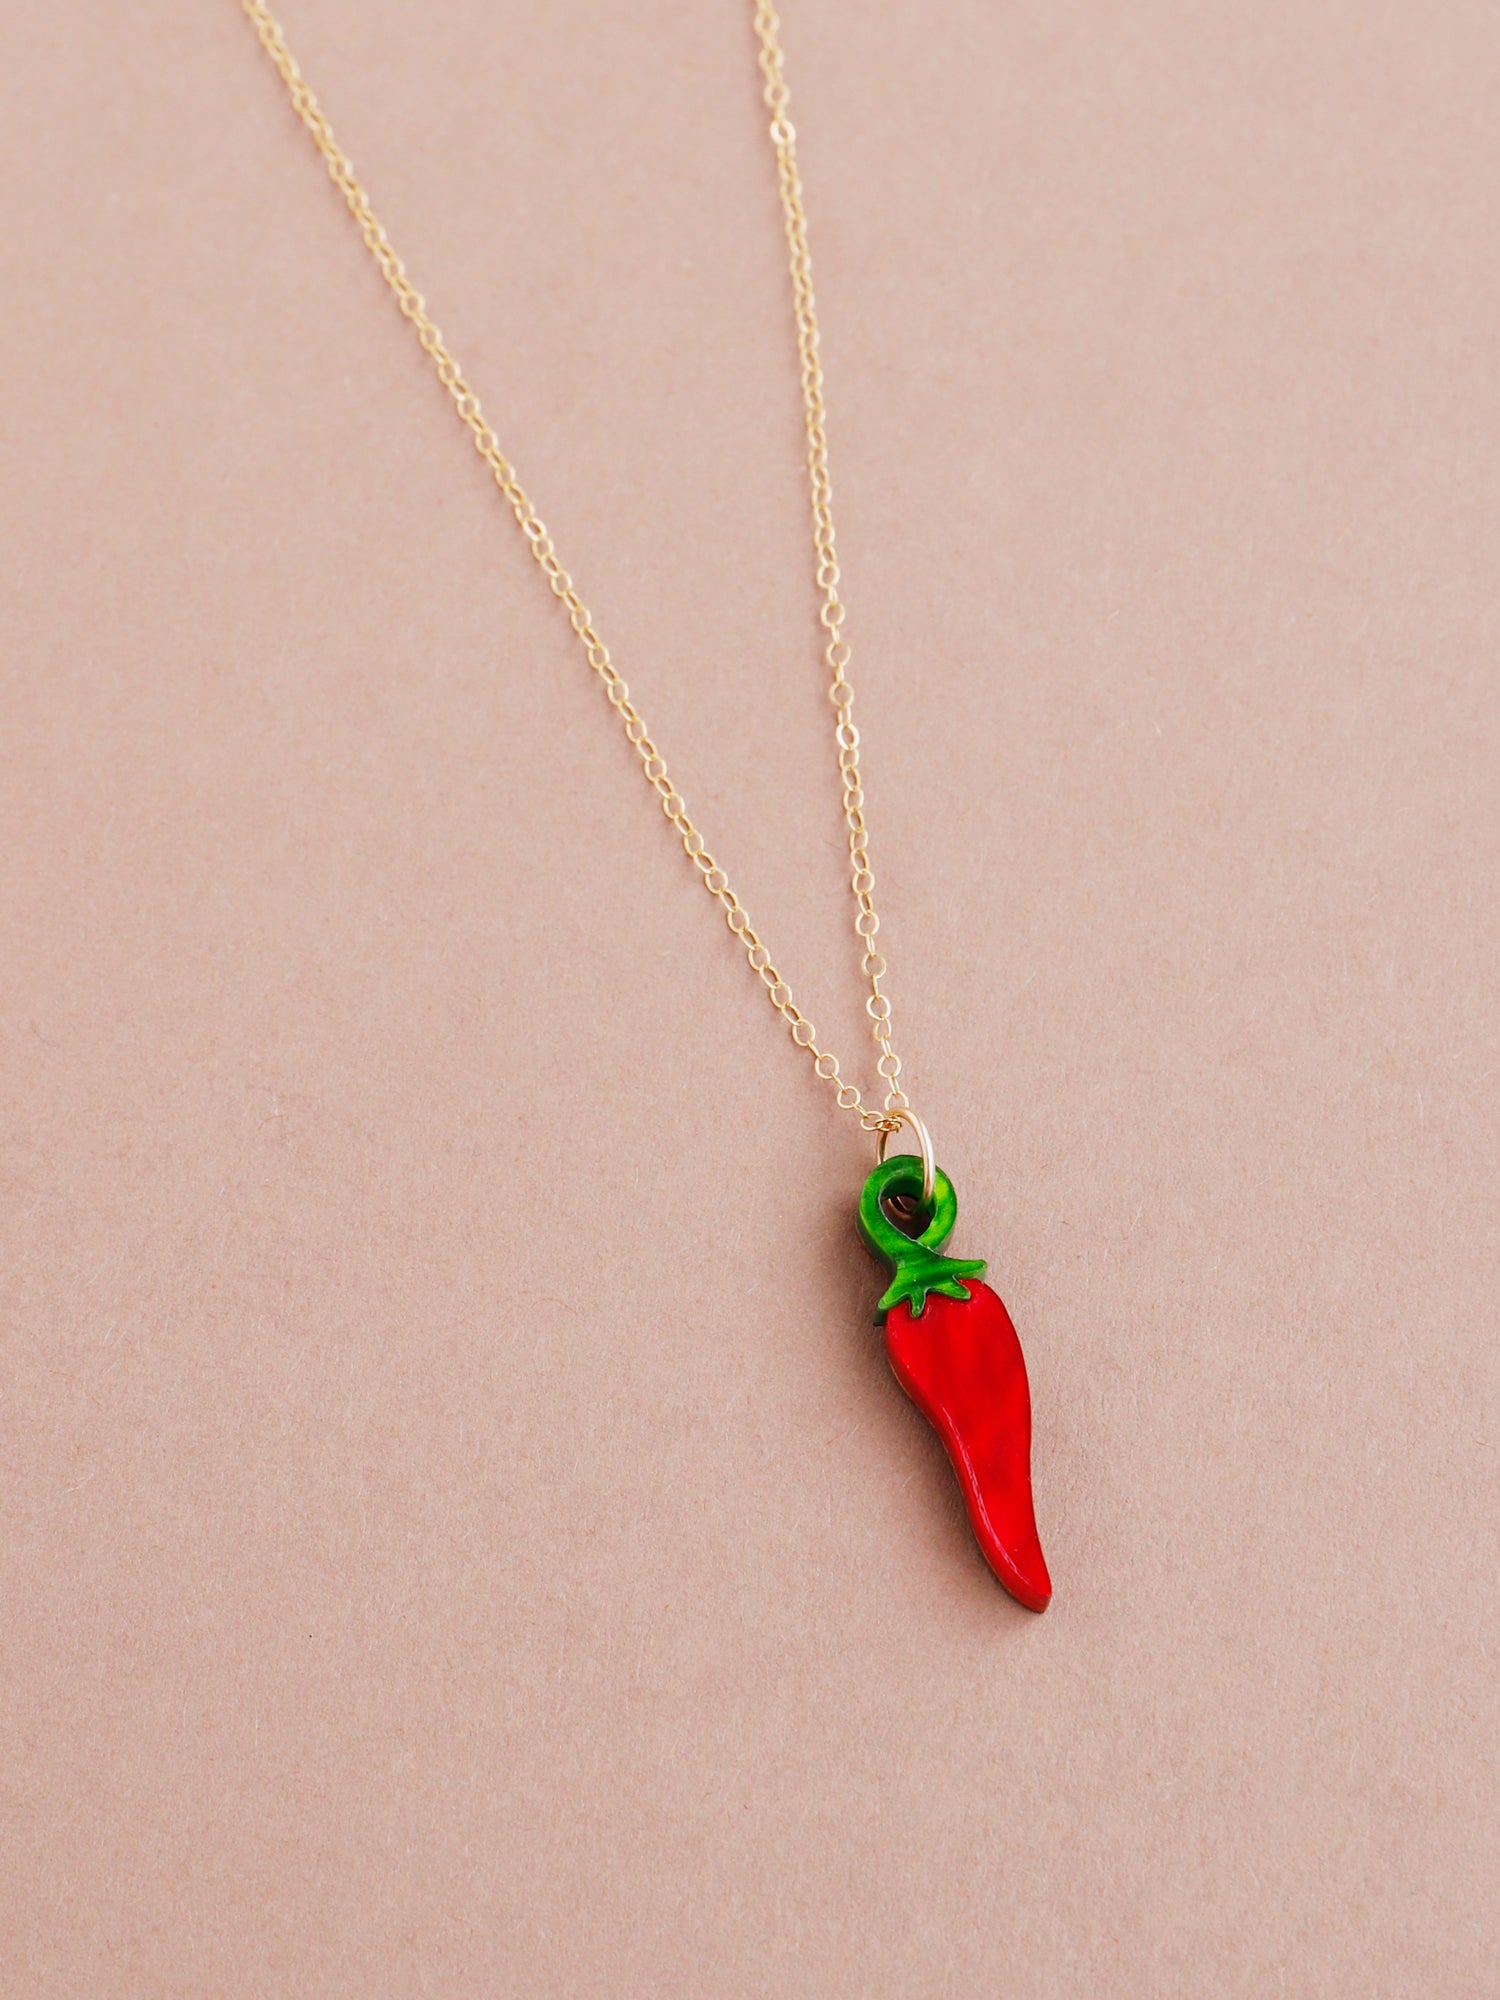 Red acrylic chilli pepper necklace with optional gold-filled chain. Handmade in London by Wolf & Moon.